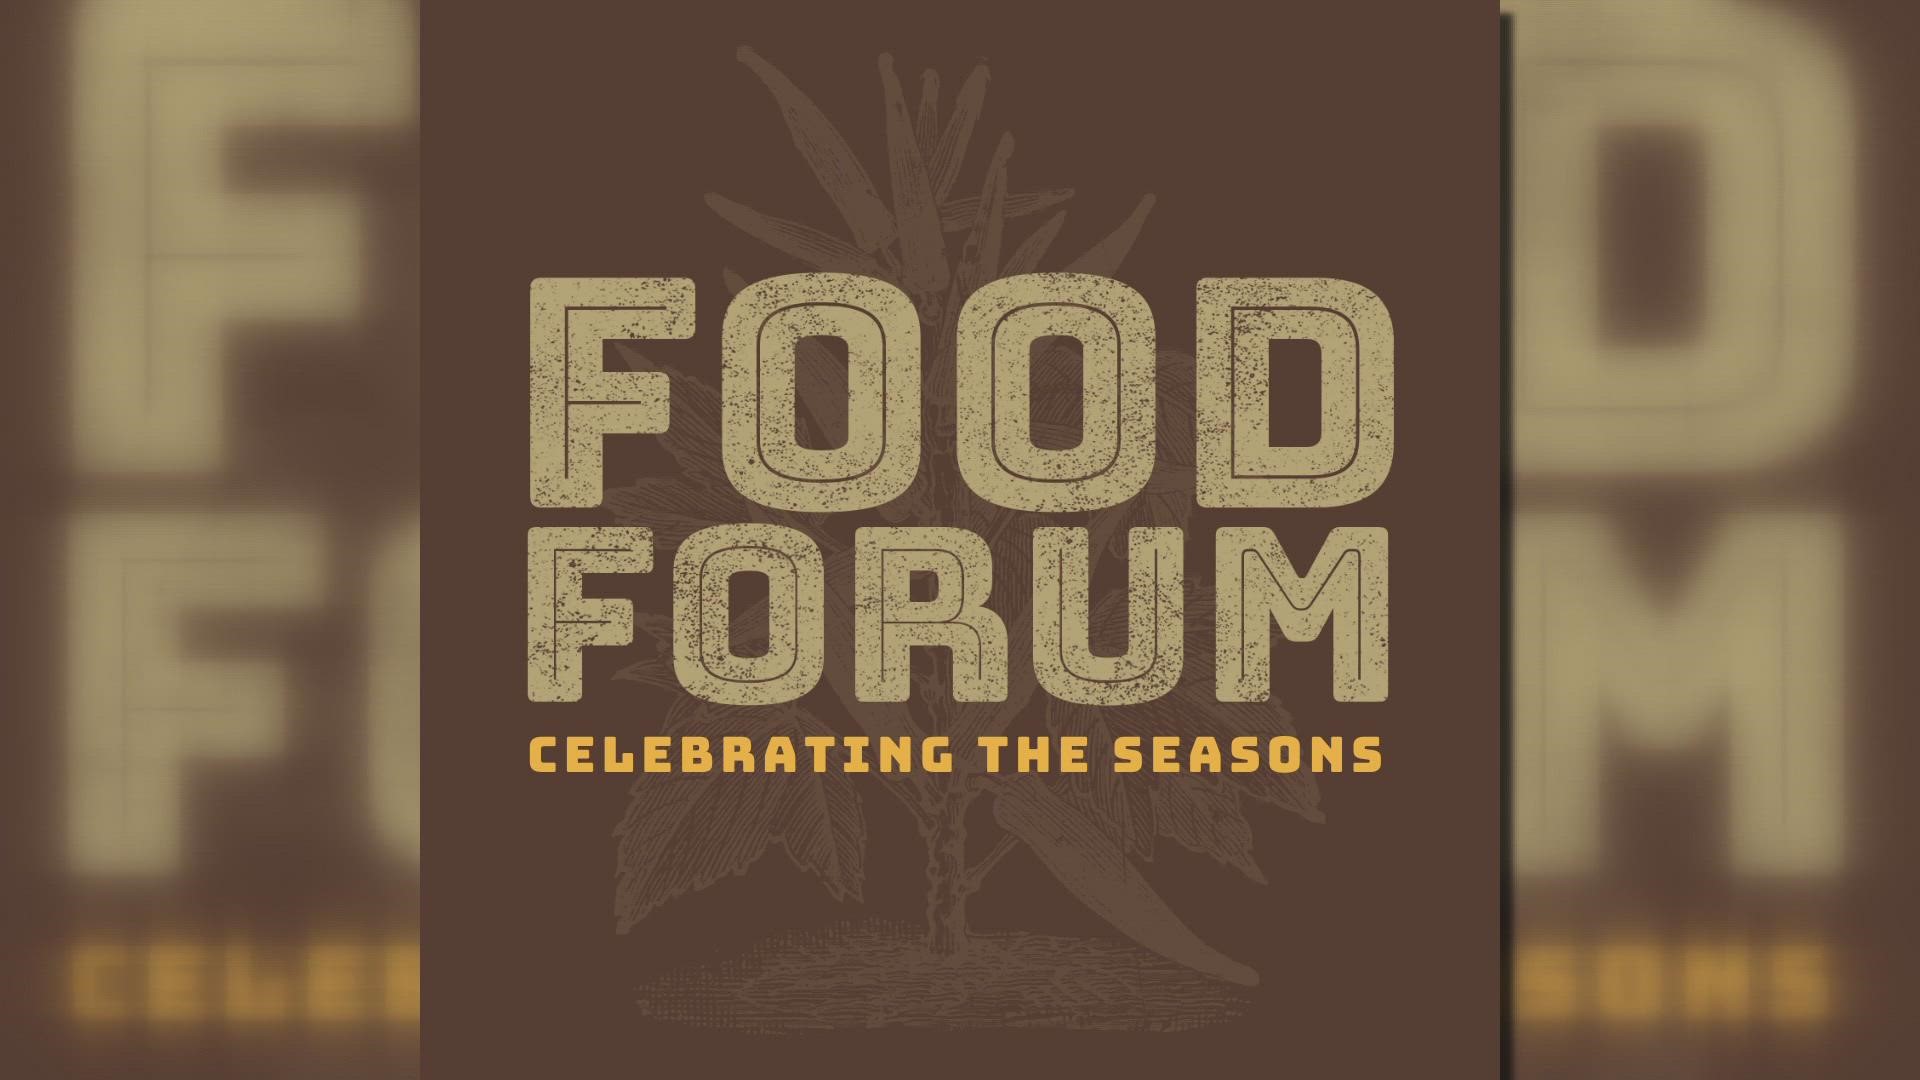 The Food Forum was created in 2010 in partnership with culinary historian and James Beard Foundation award winner, Jessica Harris.